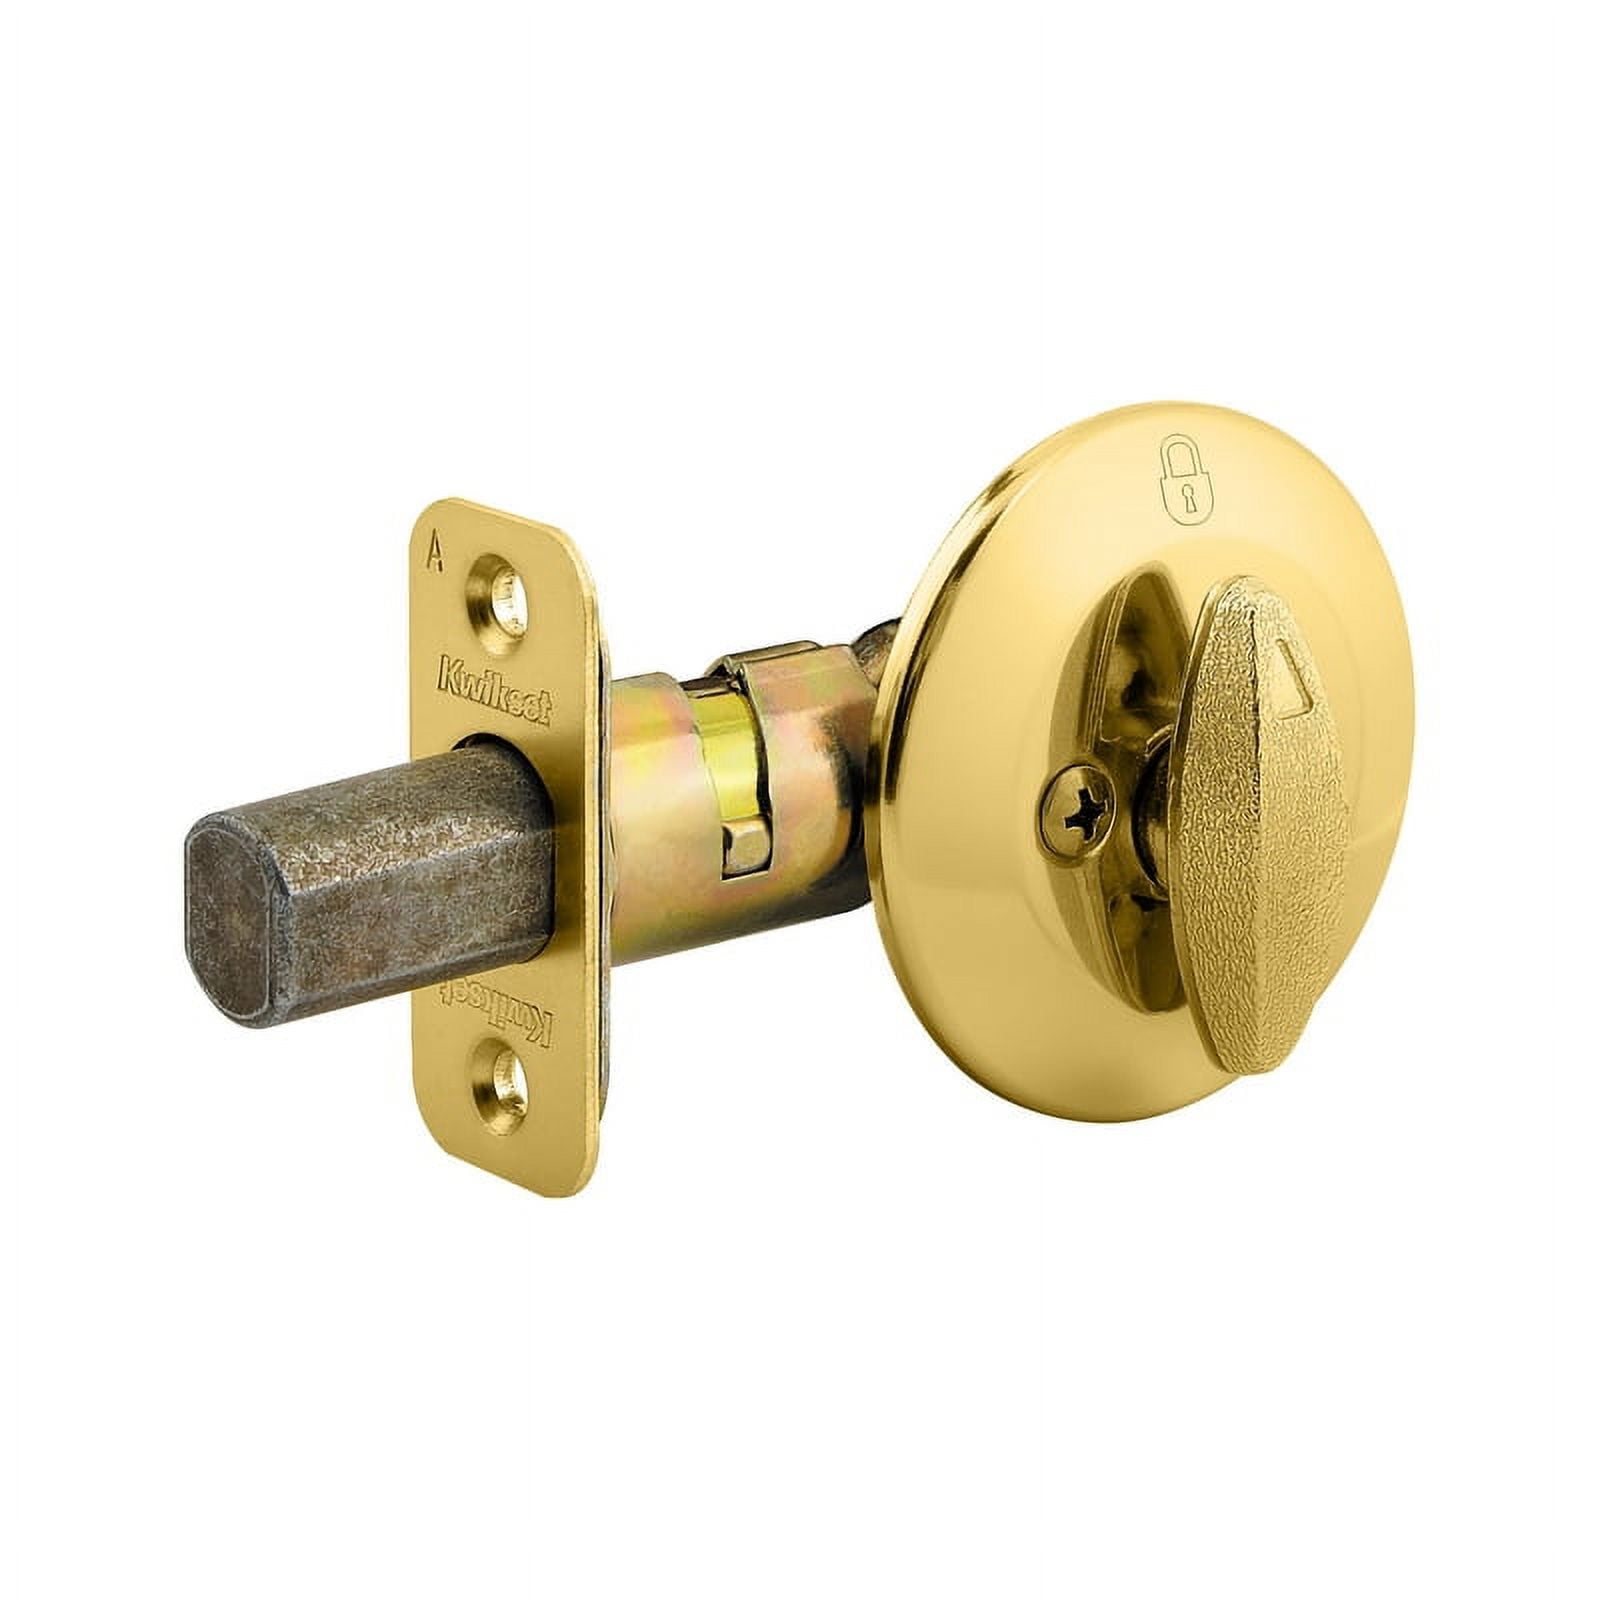 Kwikset 663 One Sided Deadbolt - Thumb Turn Only, Polished